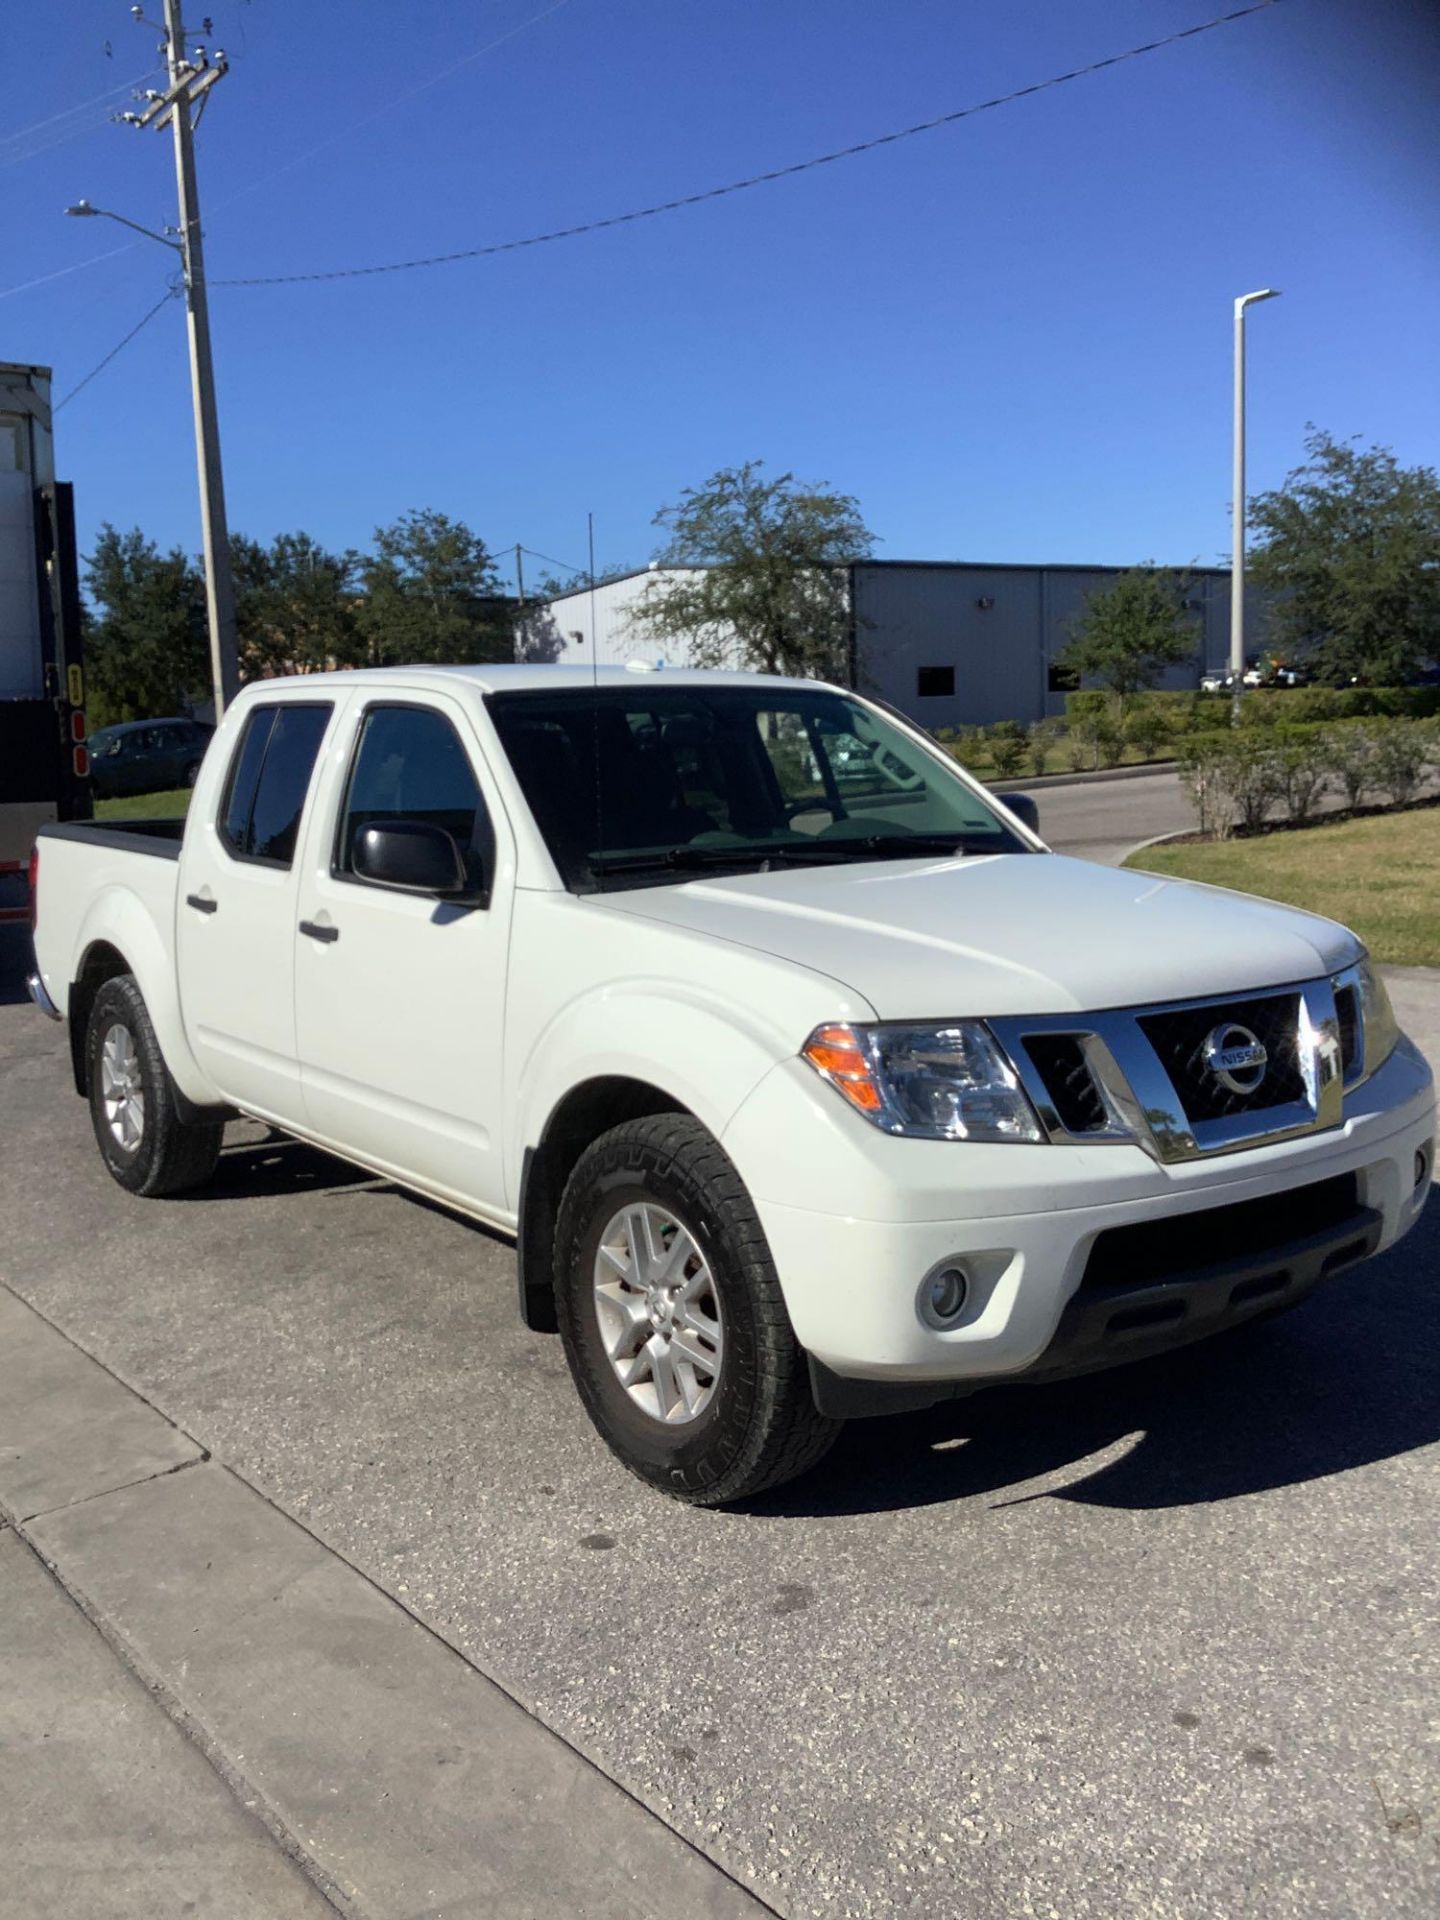 2017 NISSAN FRONTIER PICKUP TRUCK, GAS ENGINE, AUTOMATIC TRANSMISSION, CREW CAB, 4 DOOR, A/C , POWER - Image 2 of 24